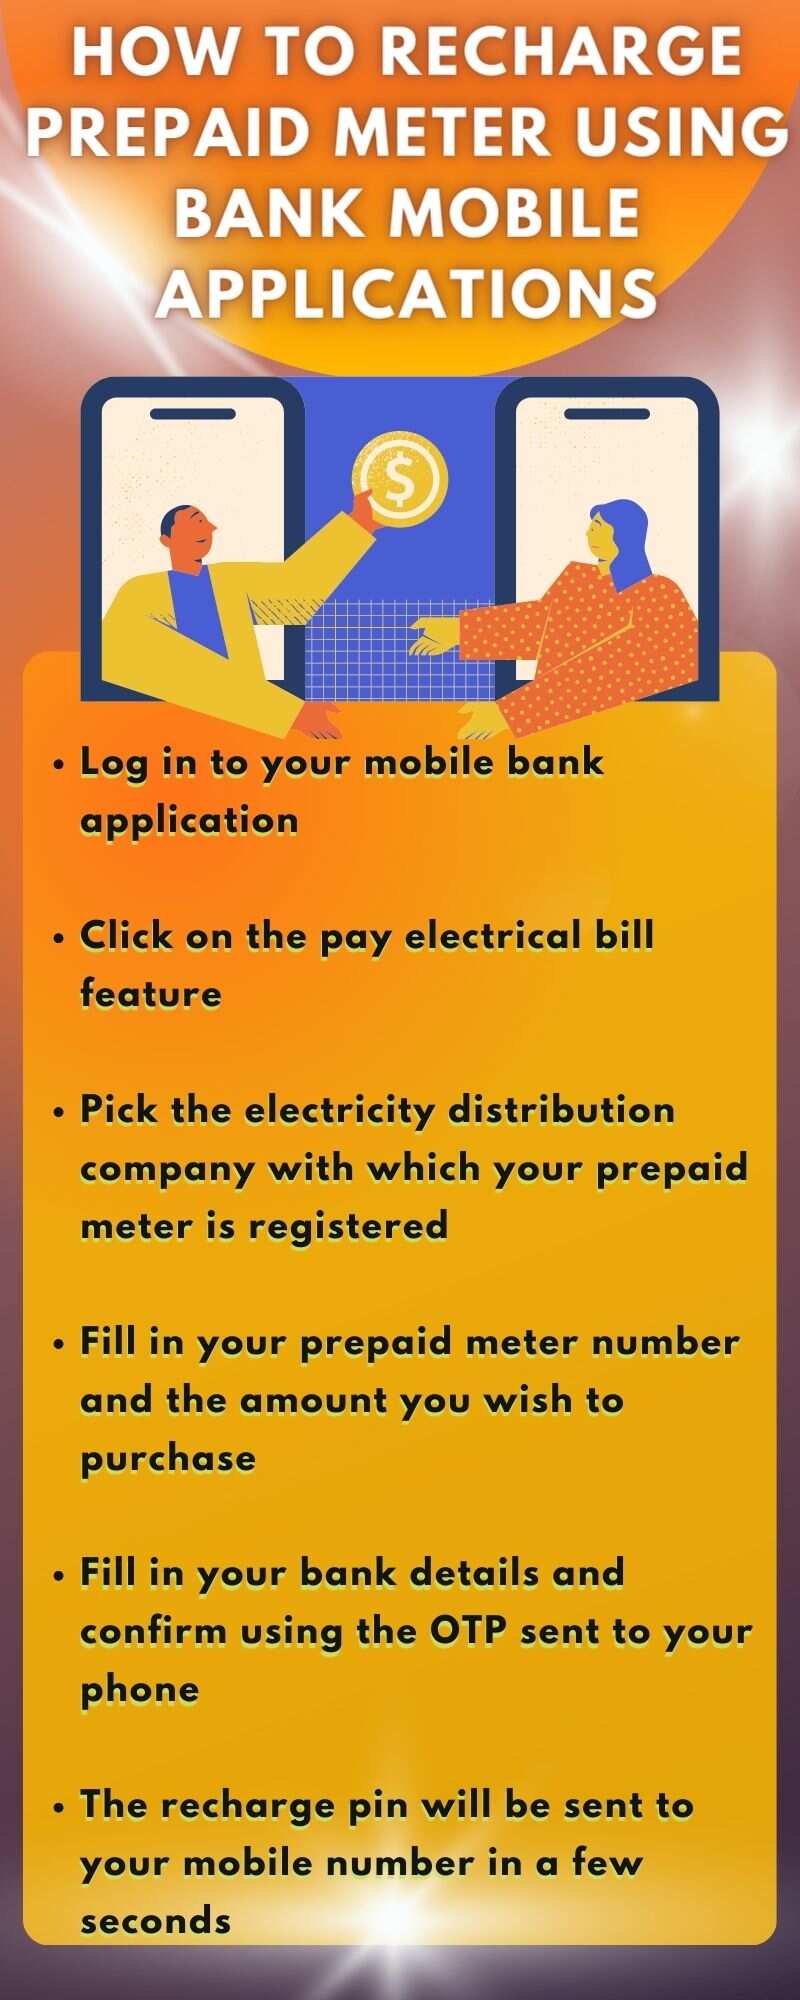 How to recharge prepaid electricity meter online